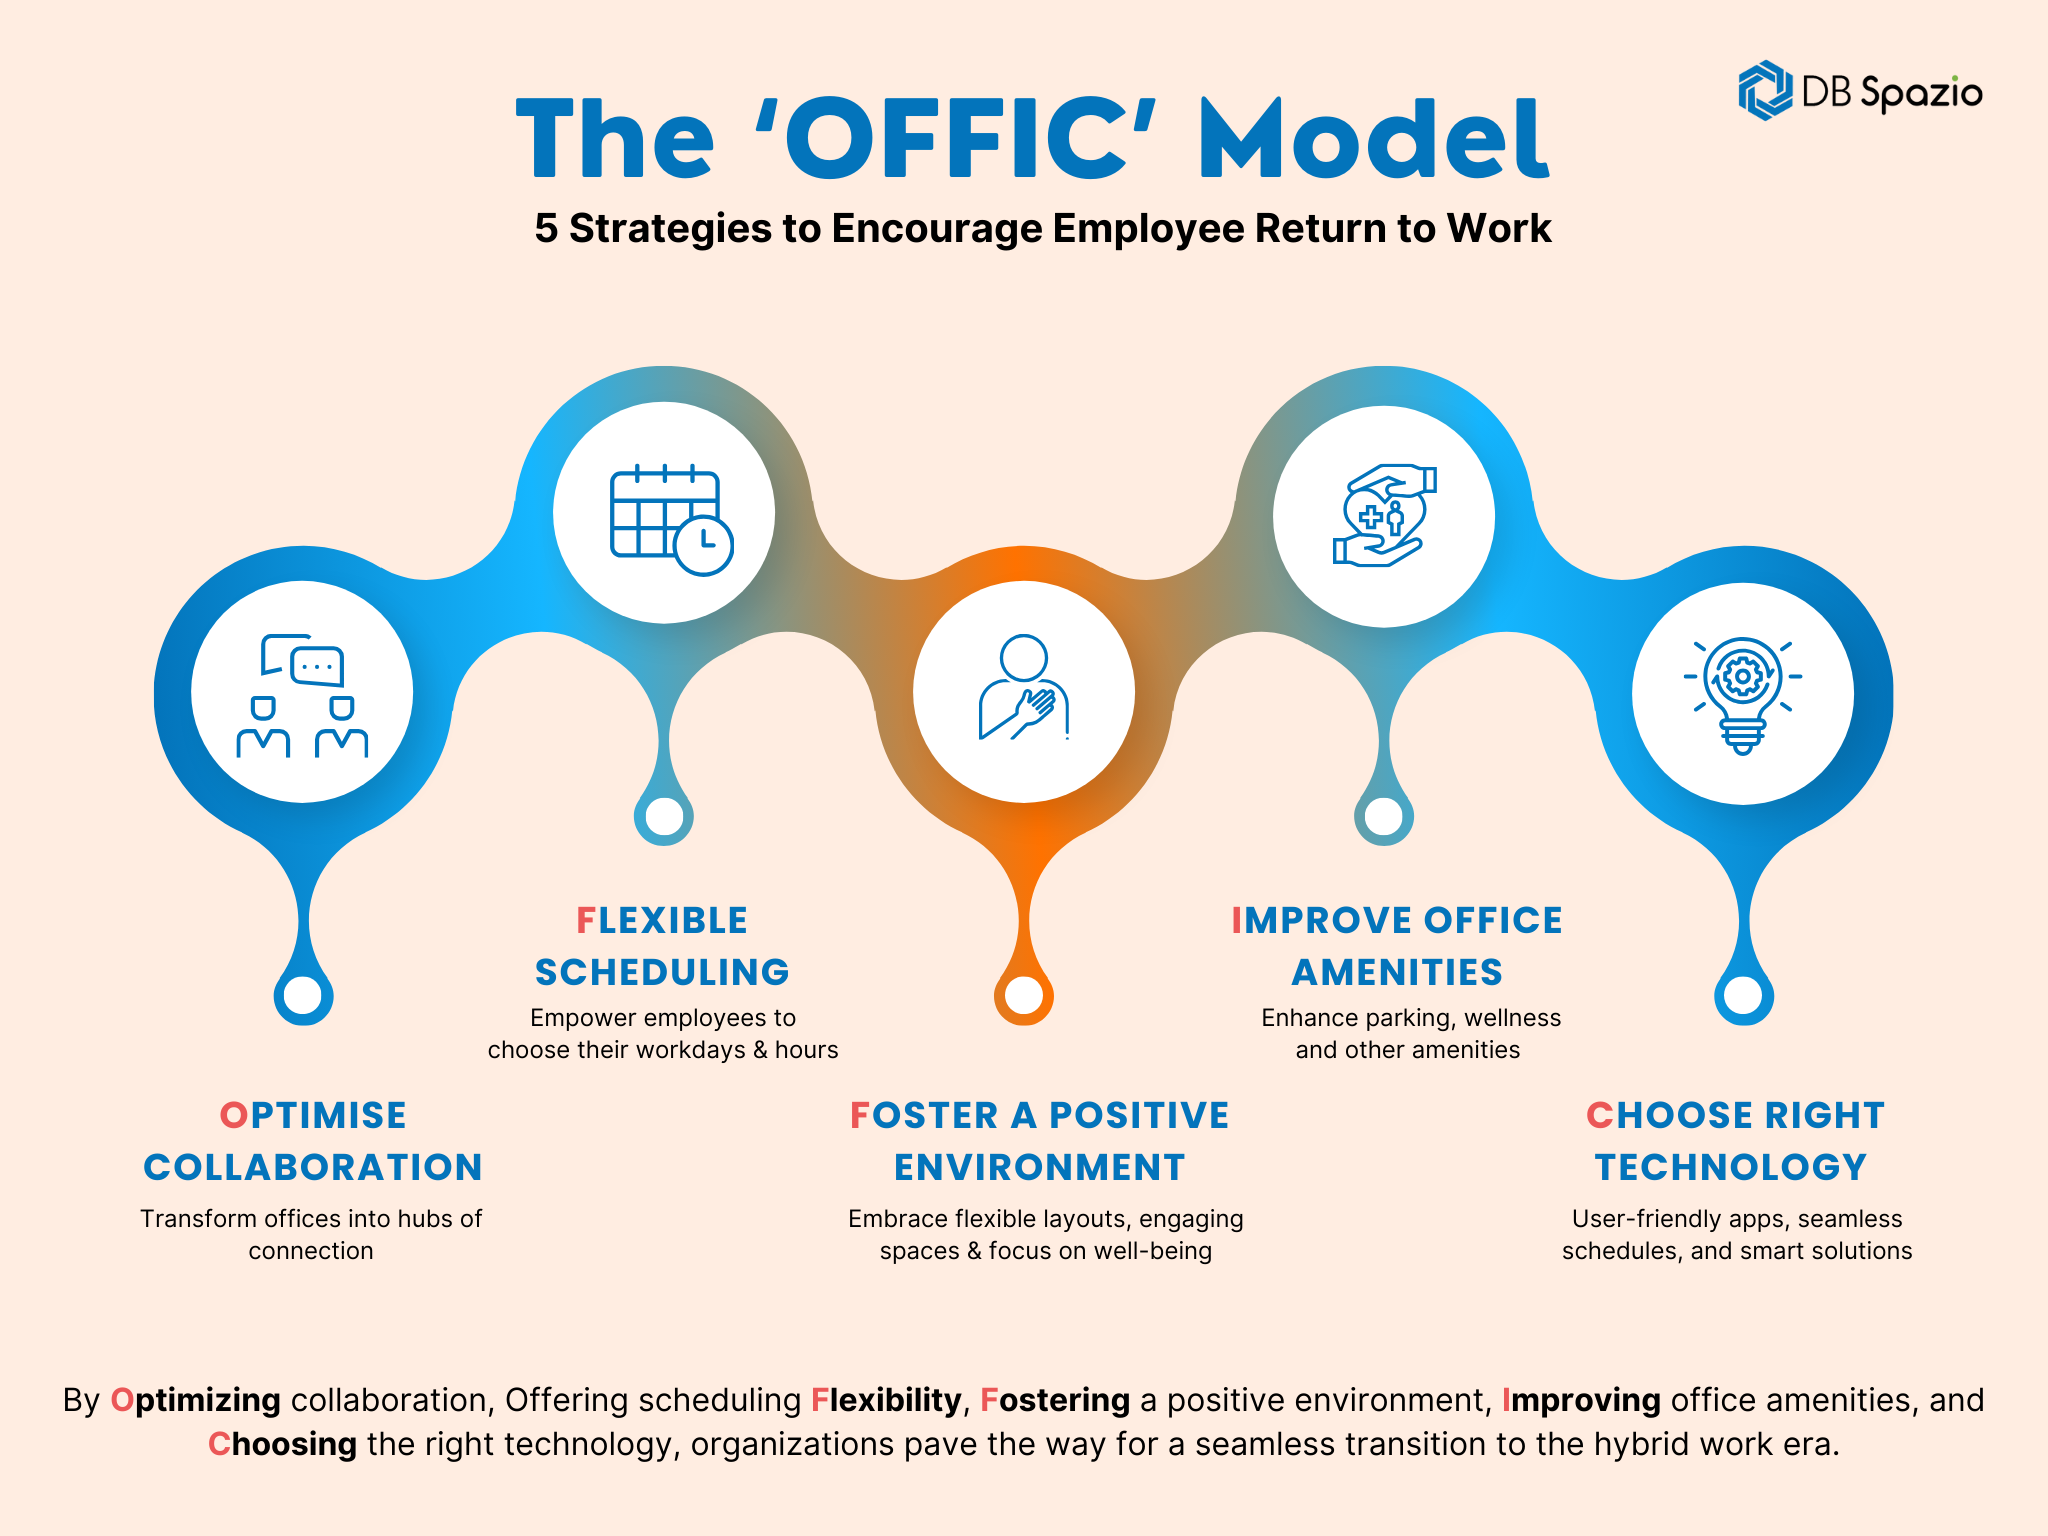 Image shows DB Spazio's OFFICE model to create a return to work strategy for attracting employees back to the office.